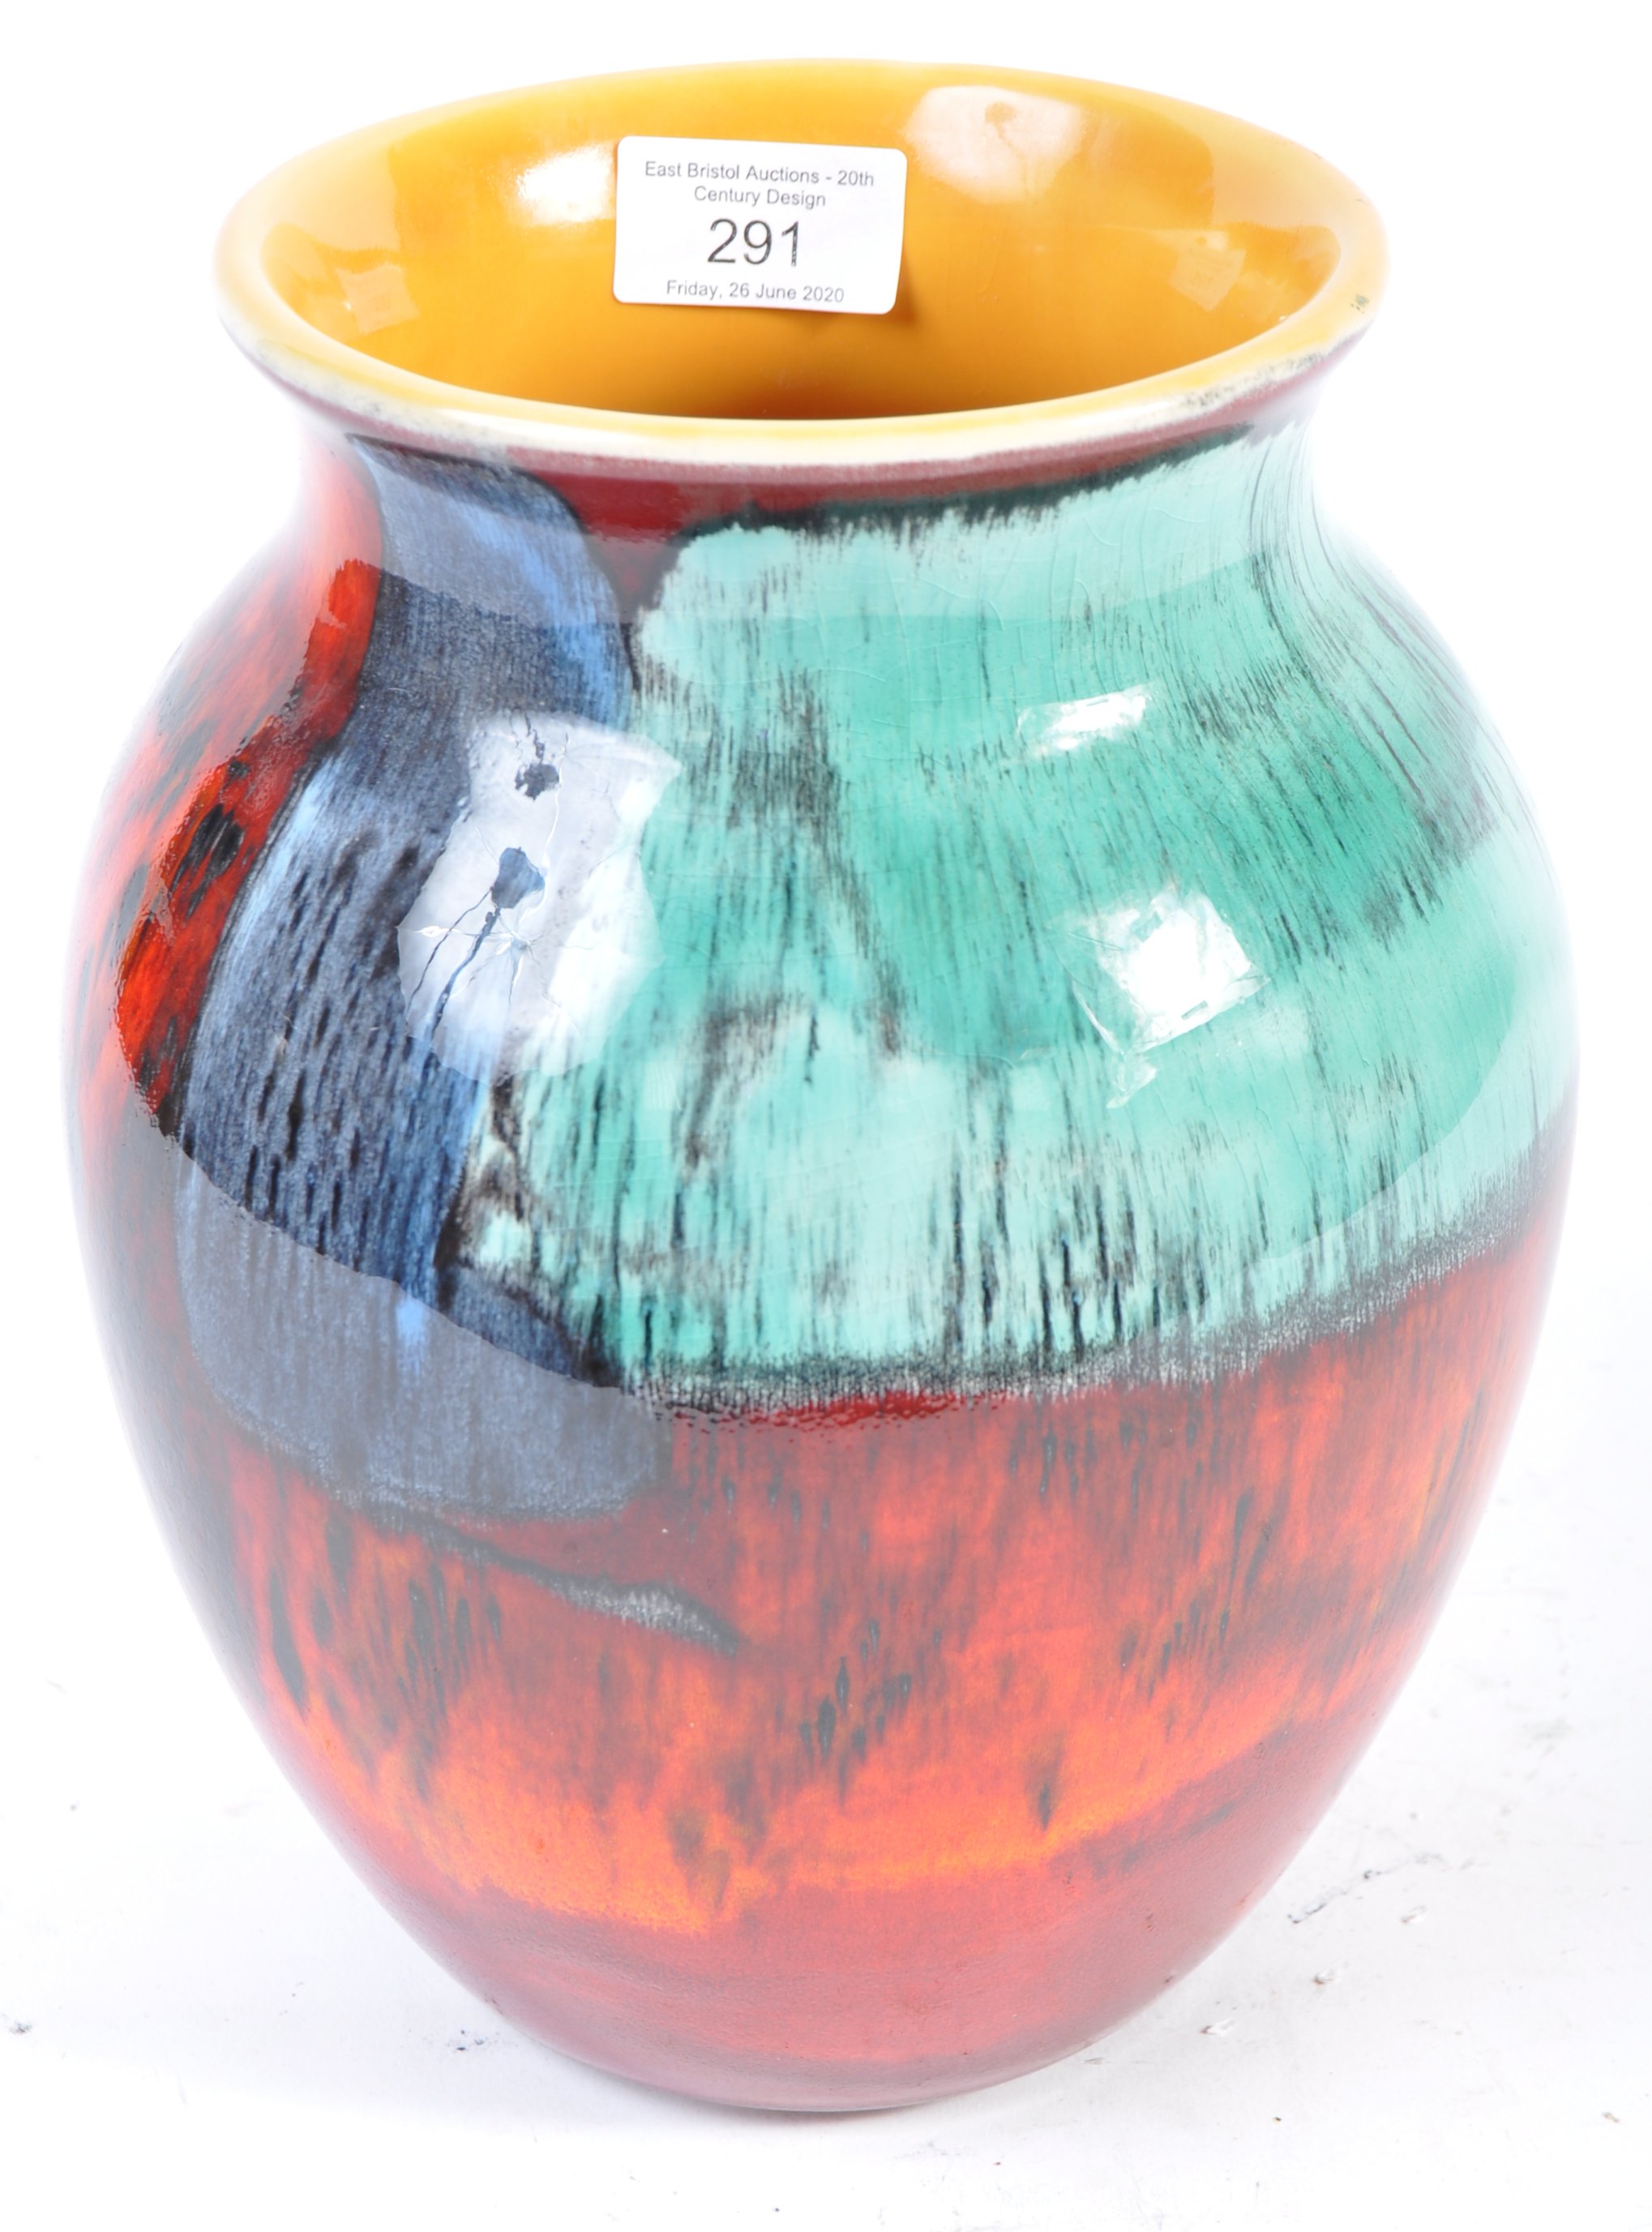 POOLE POTTERY LIVING GLAZE COLLECTORS CLUB POTTERY VASE - Image 2 of 5